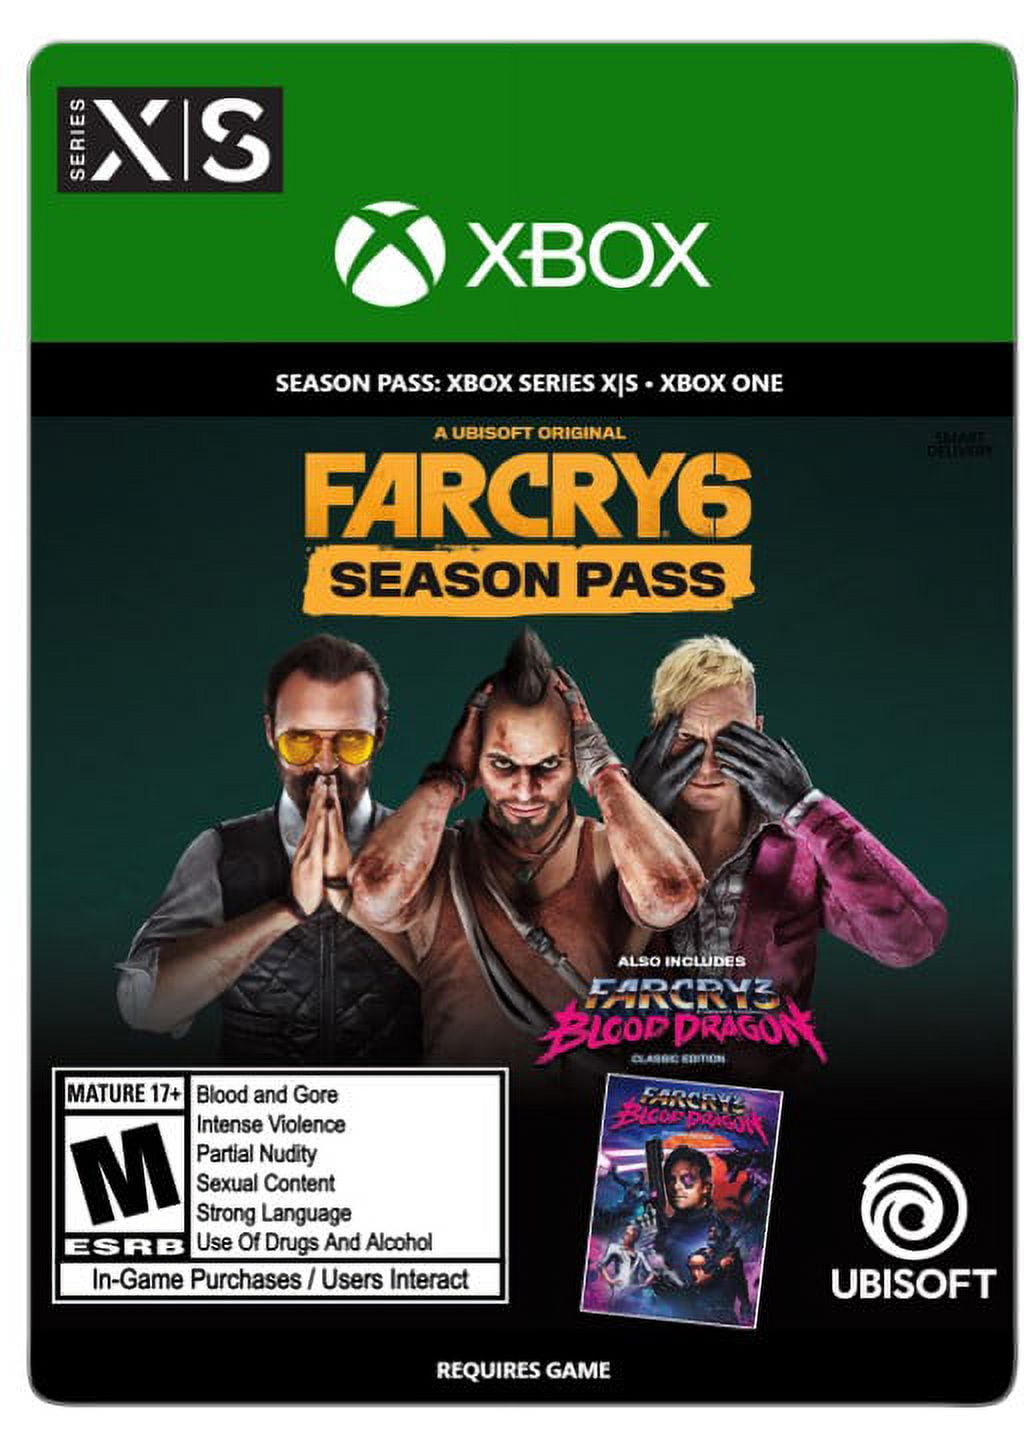 Far Cry 6 for Xbox One, PS4, PC, & More